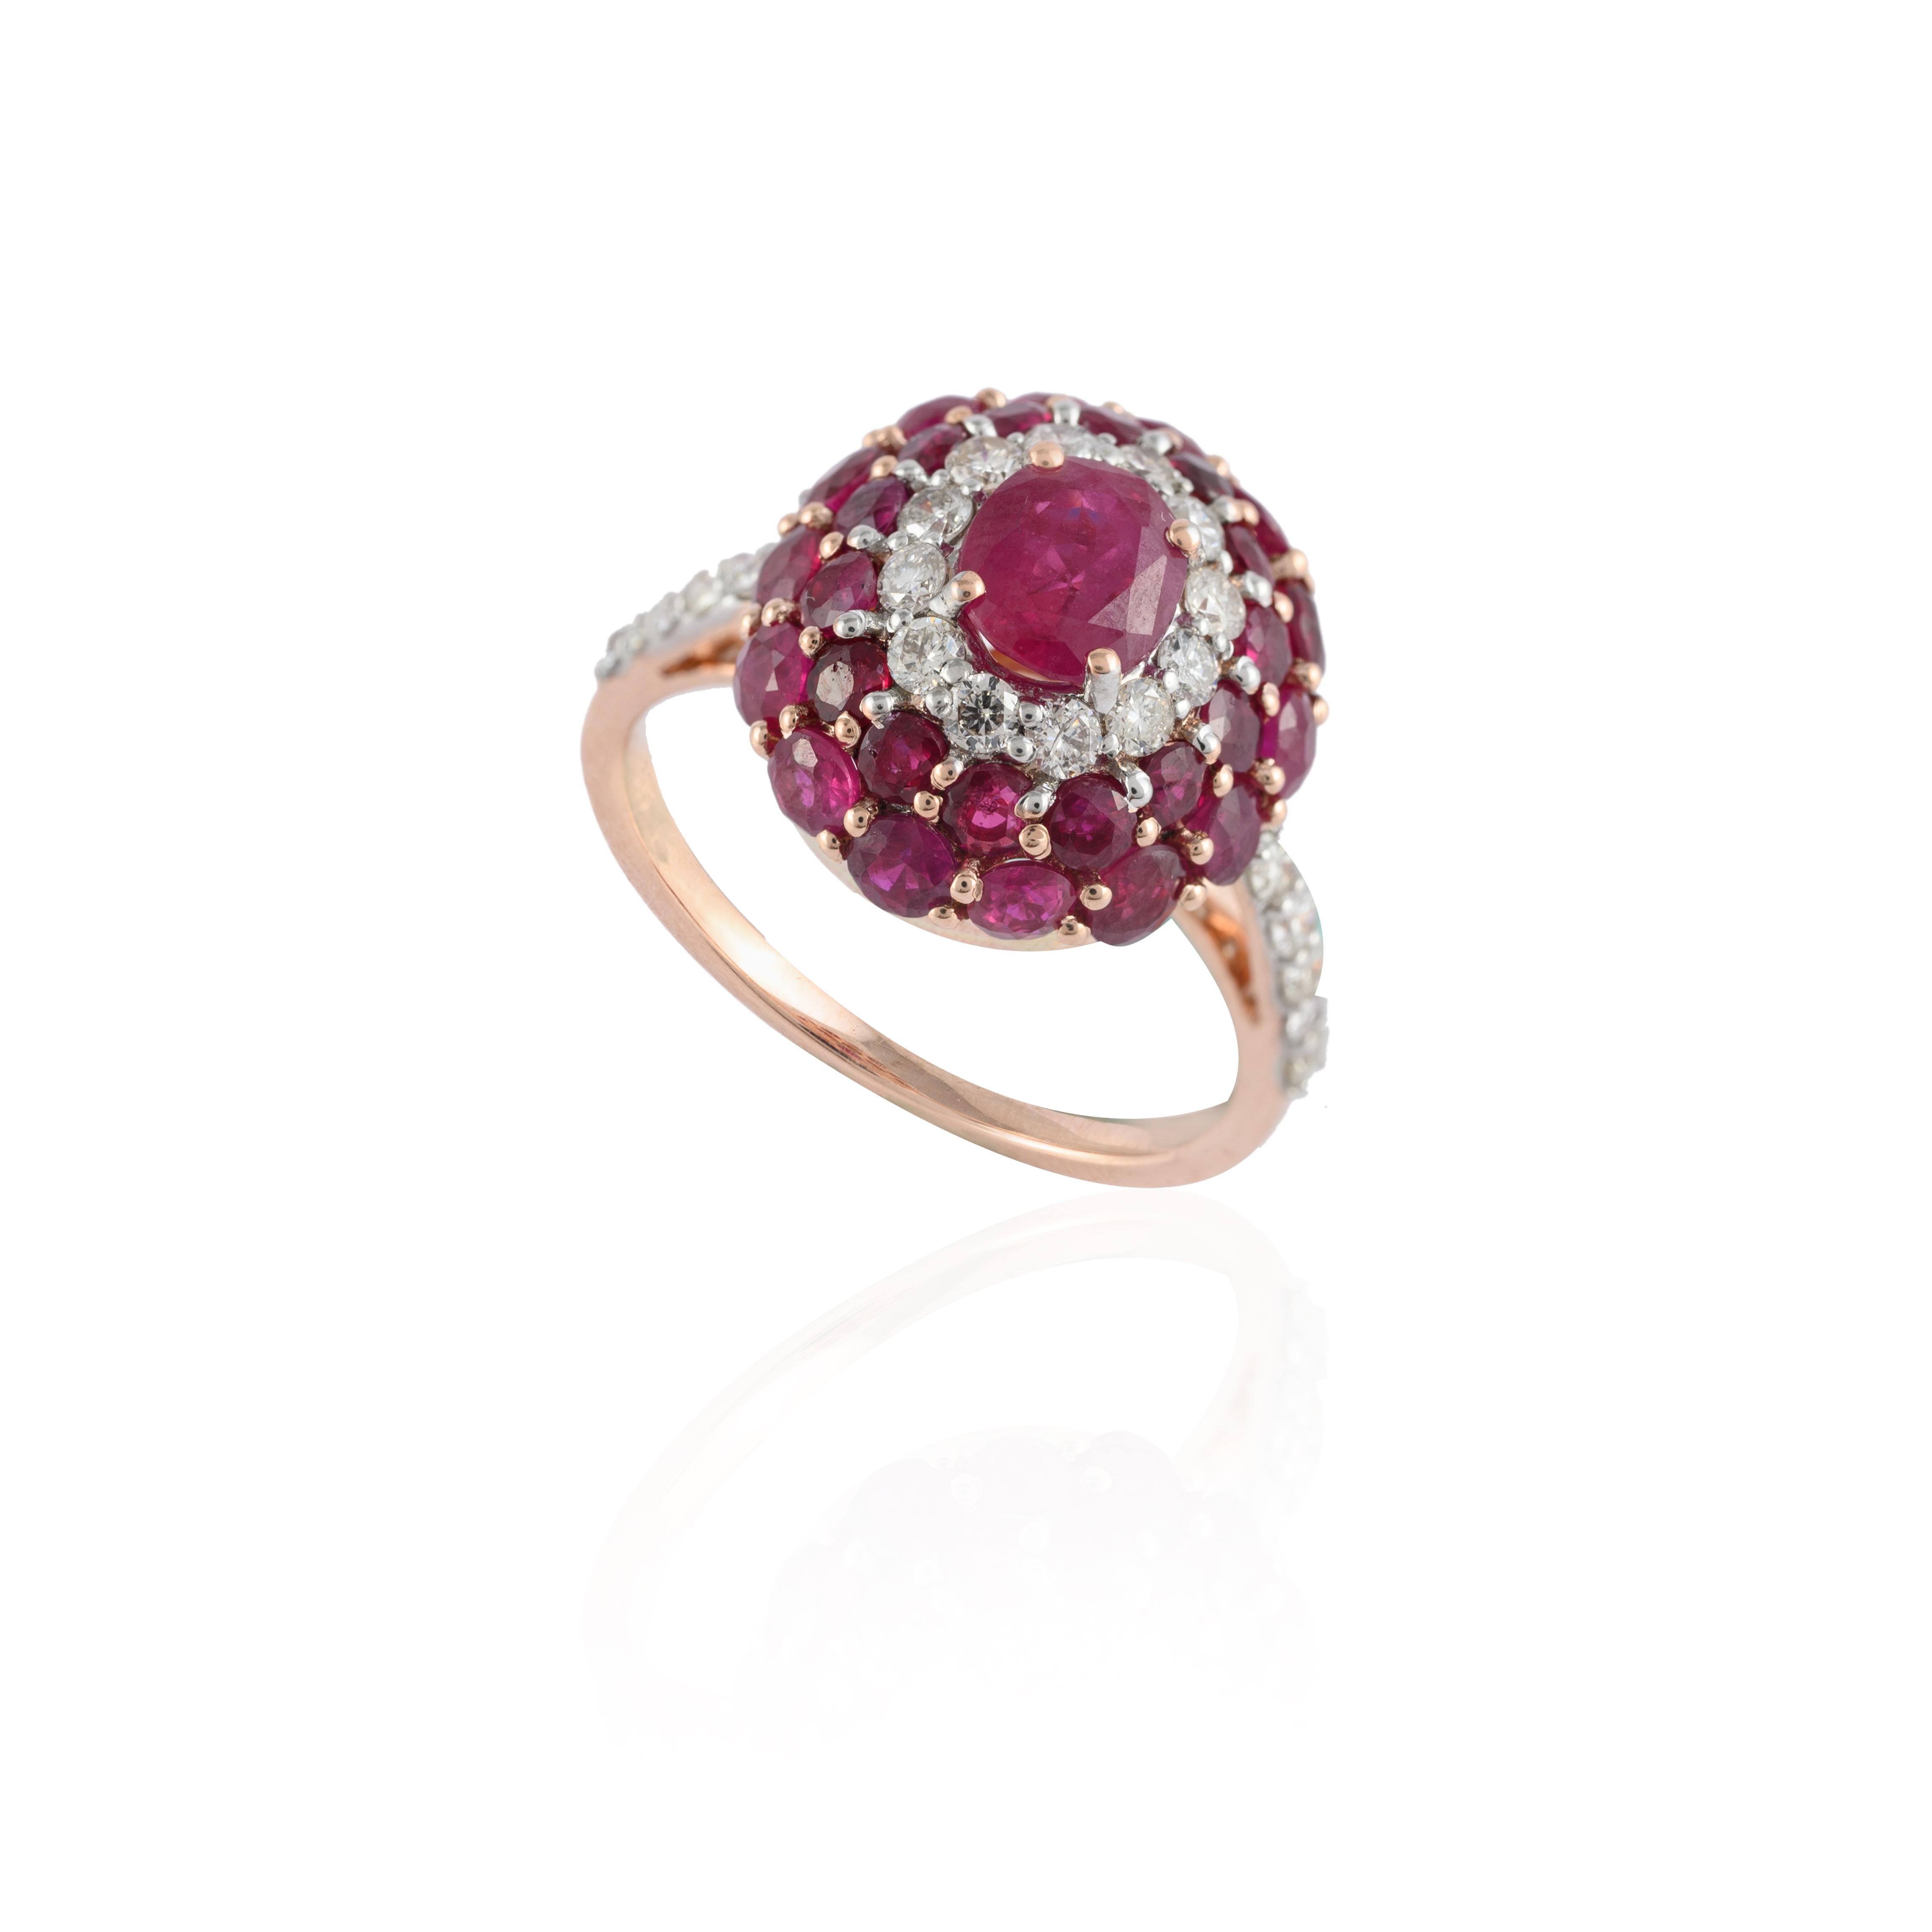 For Sale:  2.76 Carat Natural Ruby Cluster Ring in 14k Solid Rose Gold with Diamonds 5